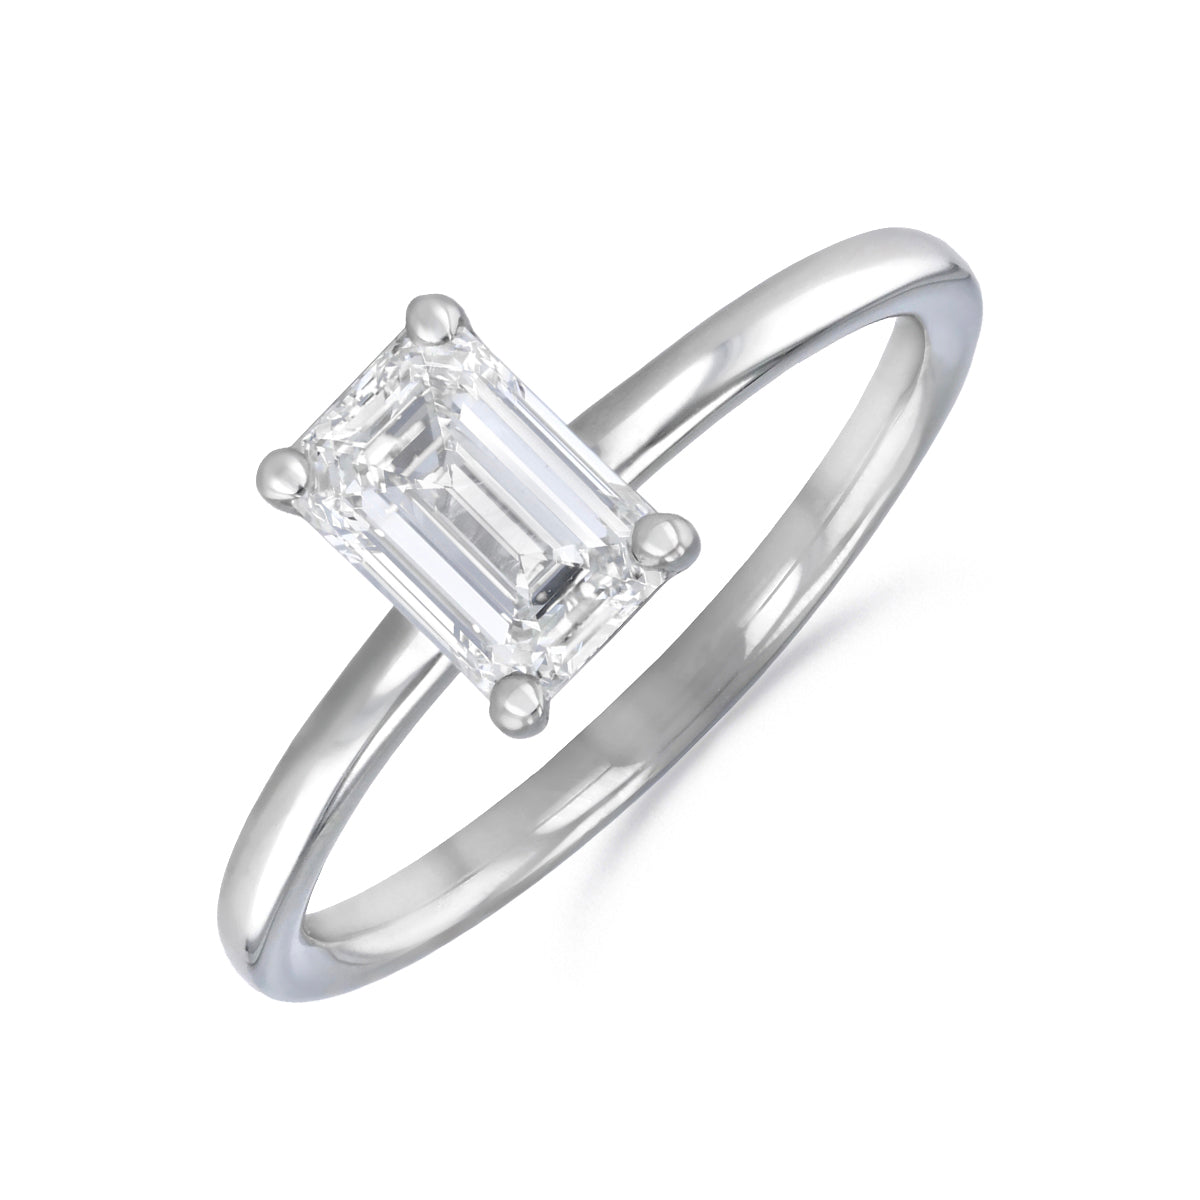 1-50ct-sofia-emerald-cut-solitaire-diamond-engagement-ring-18ct-white-gold